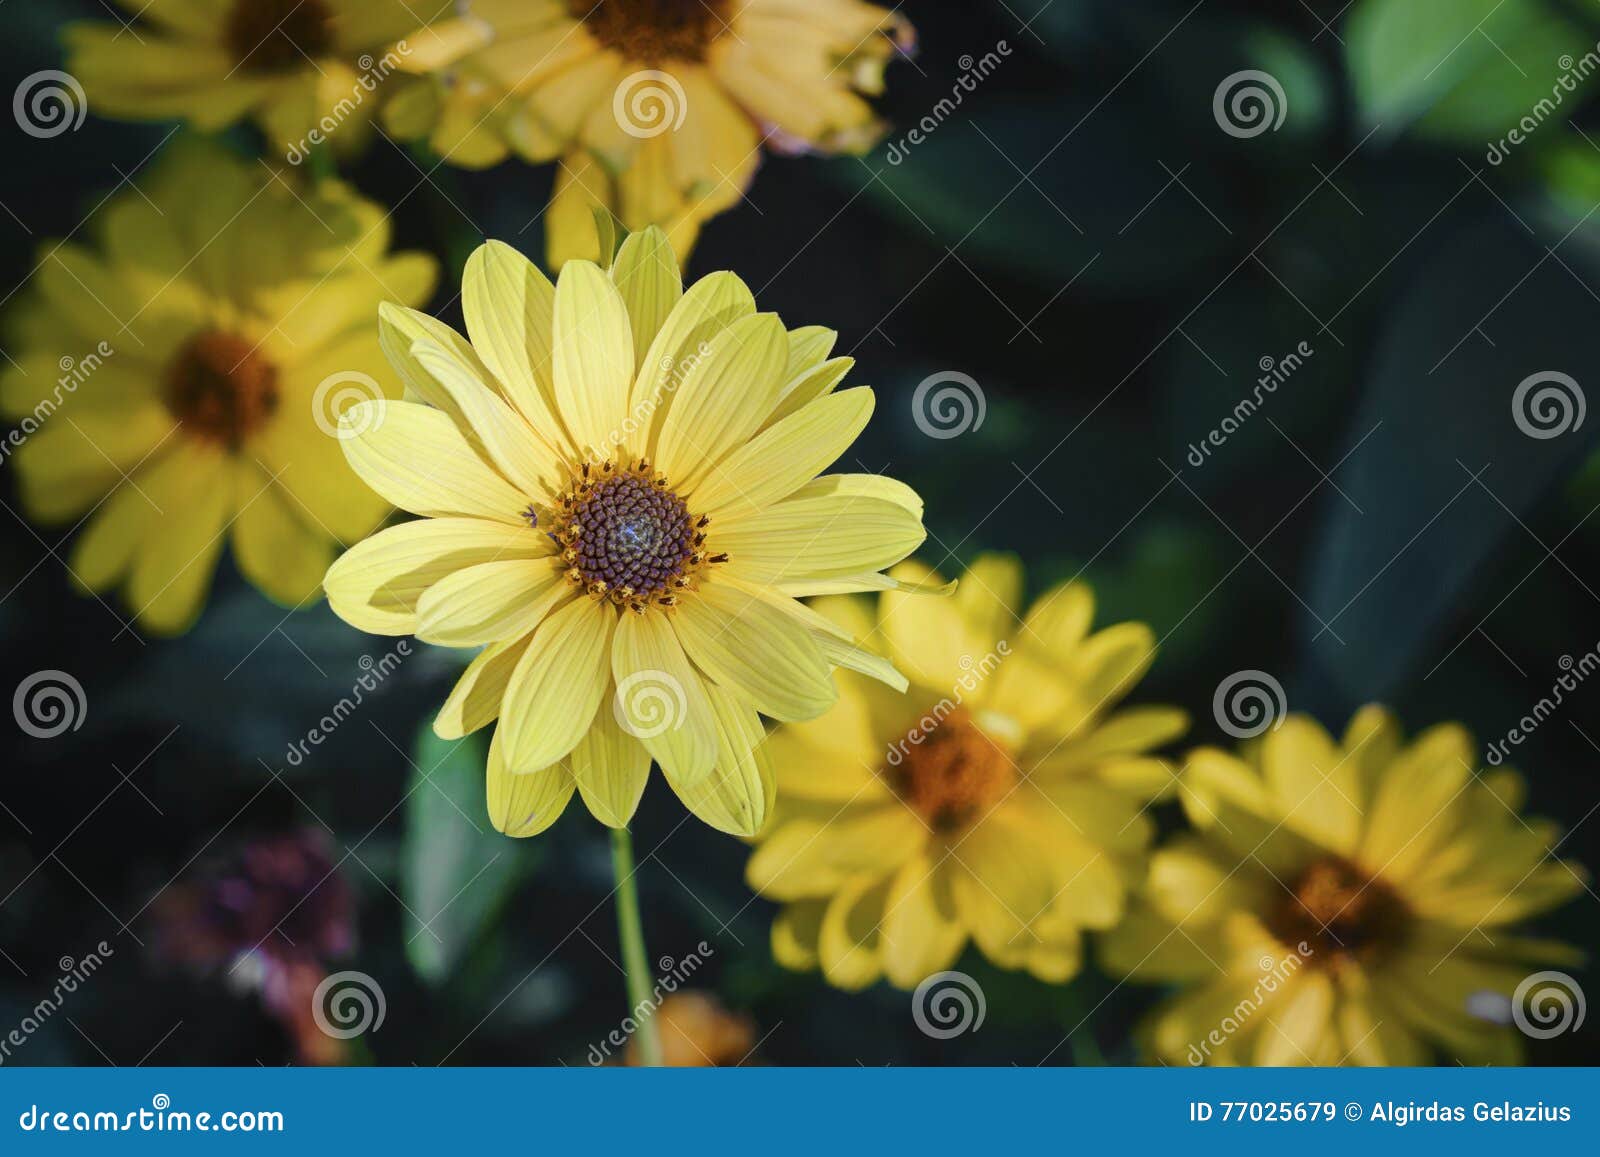 arnica herb blossoms